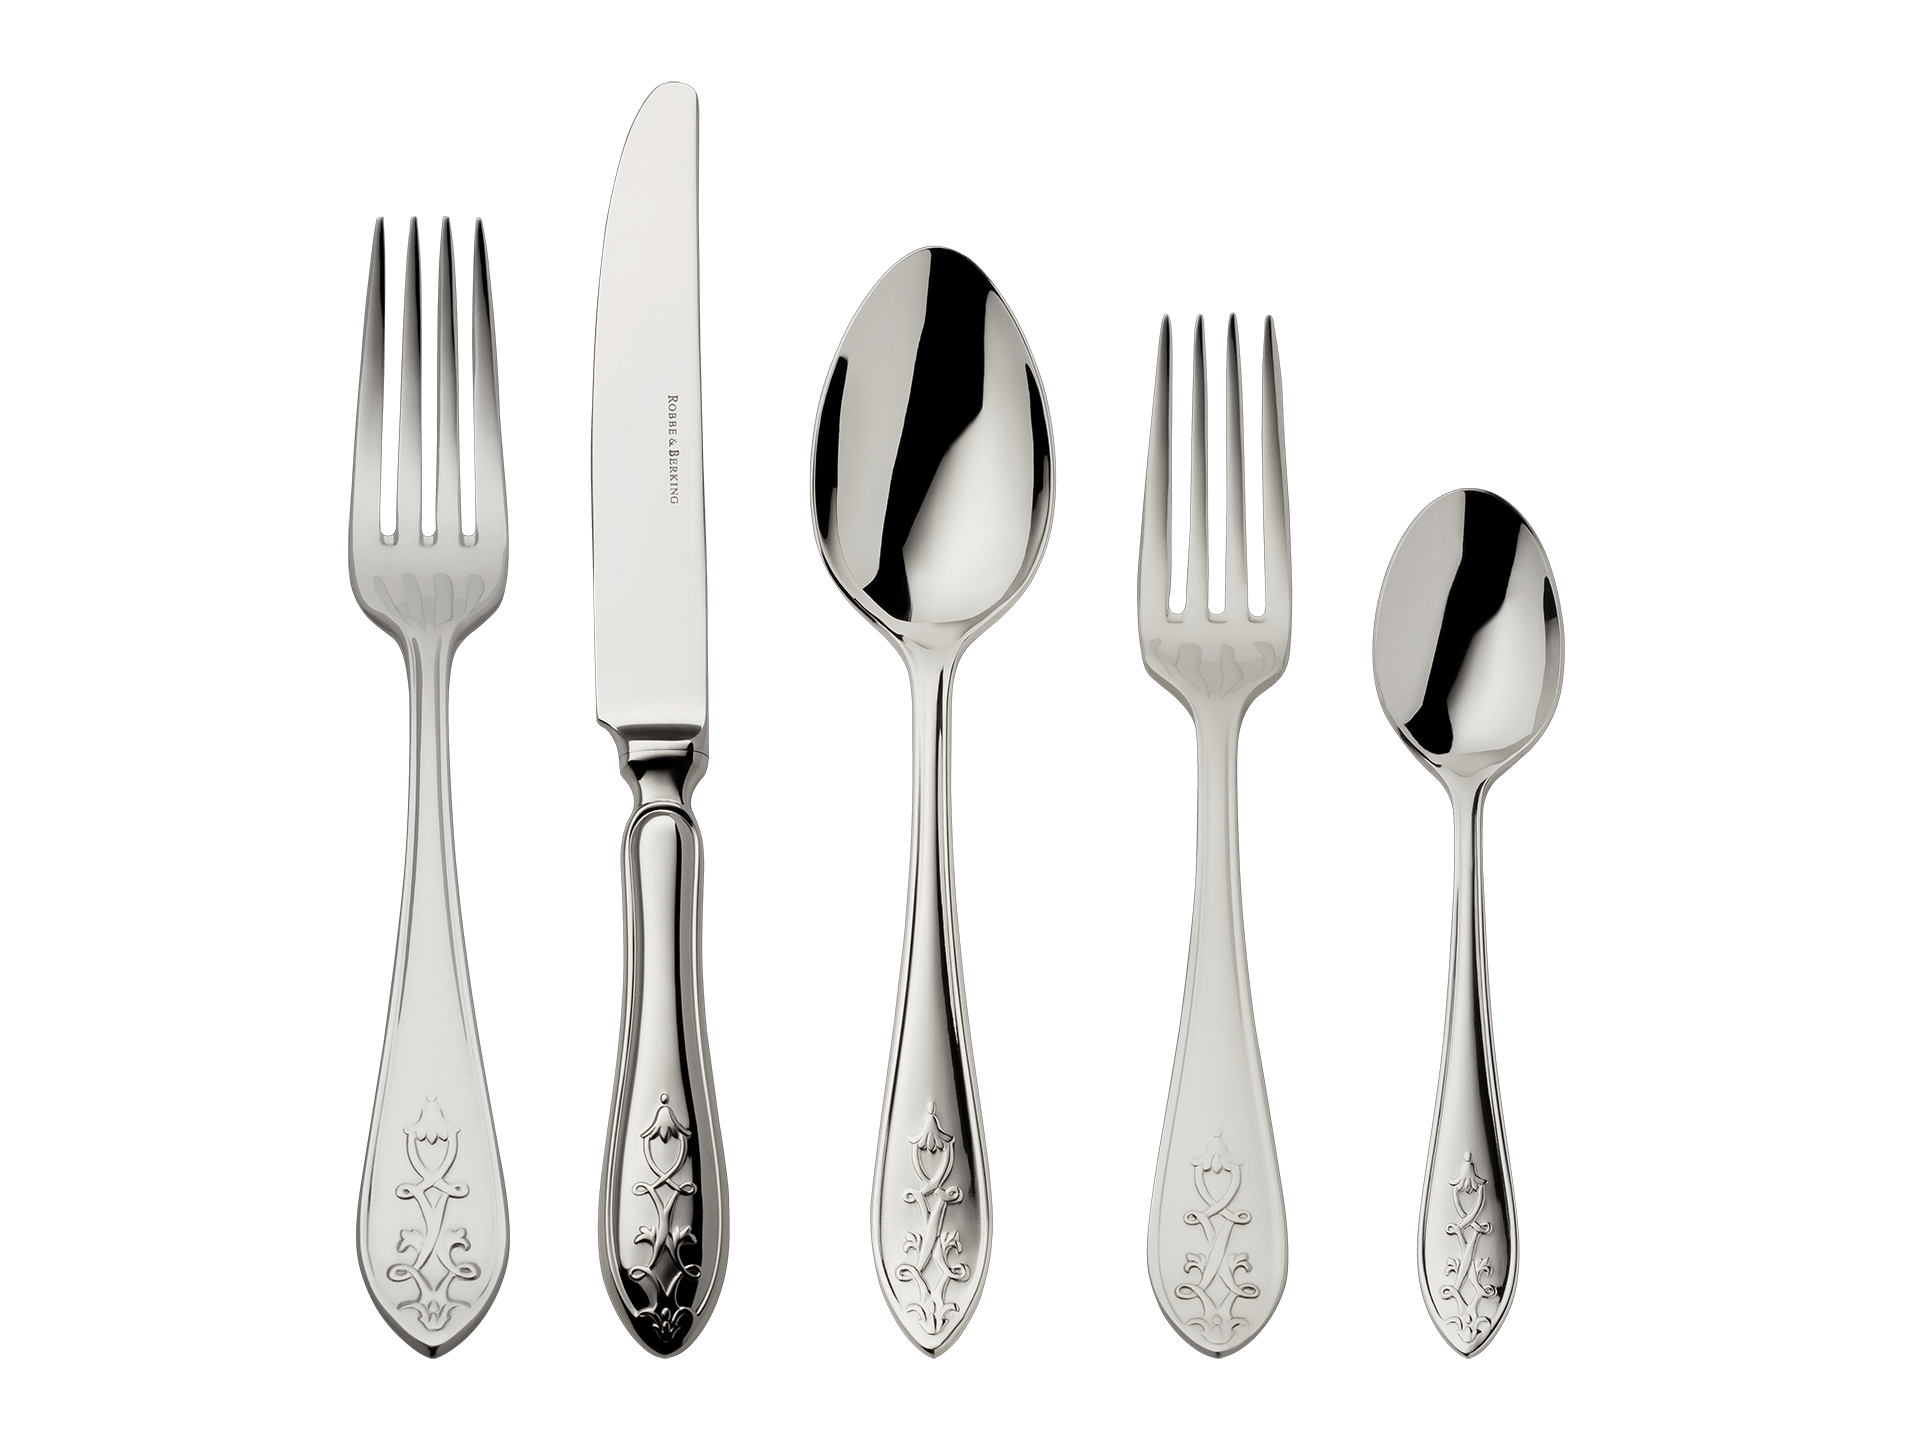 Jardin 5-piece place setting (18/8 stainless steel)